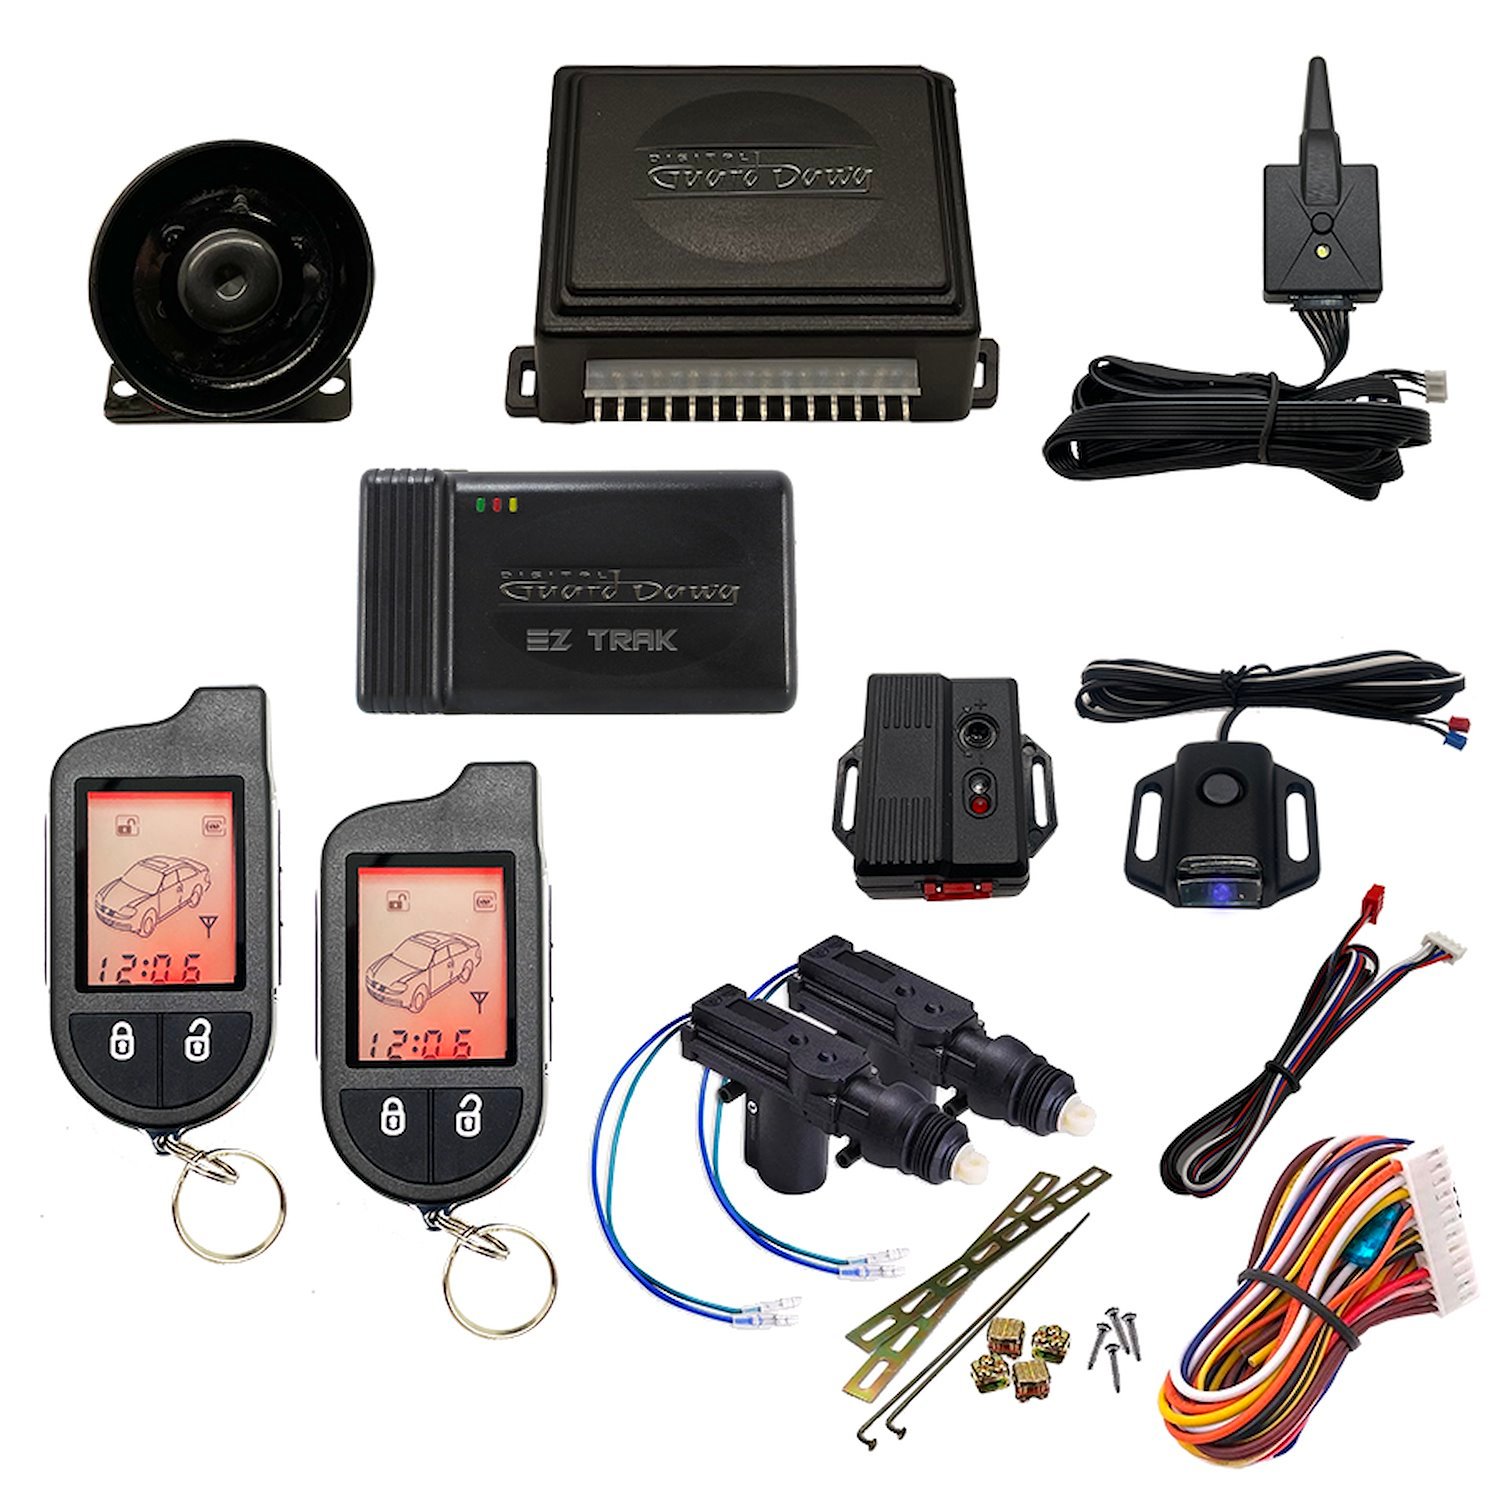 DGD-KY-ALM-2-2A-EZ Keyless Entry and Alarm System, 2-Way, w/2-Door Actuator Kit and Smart Phone EZ-Tracking